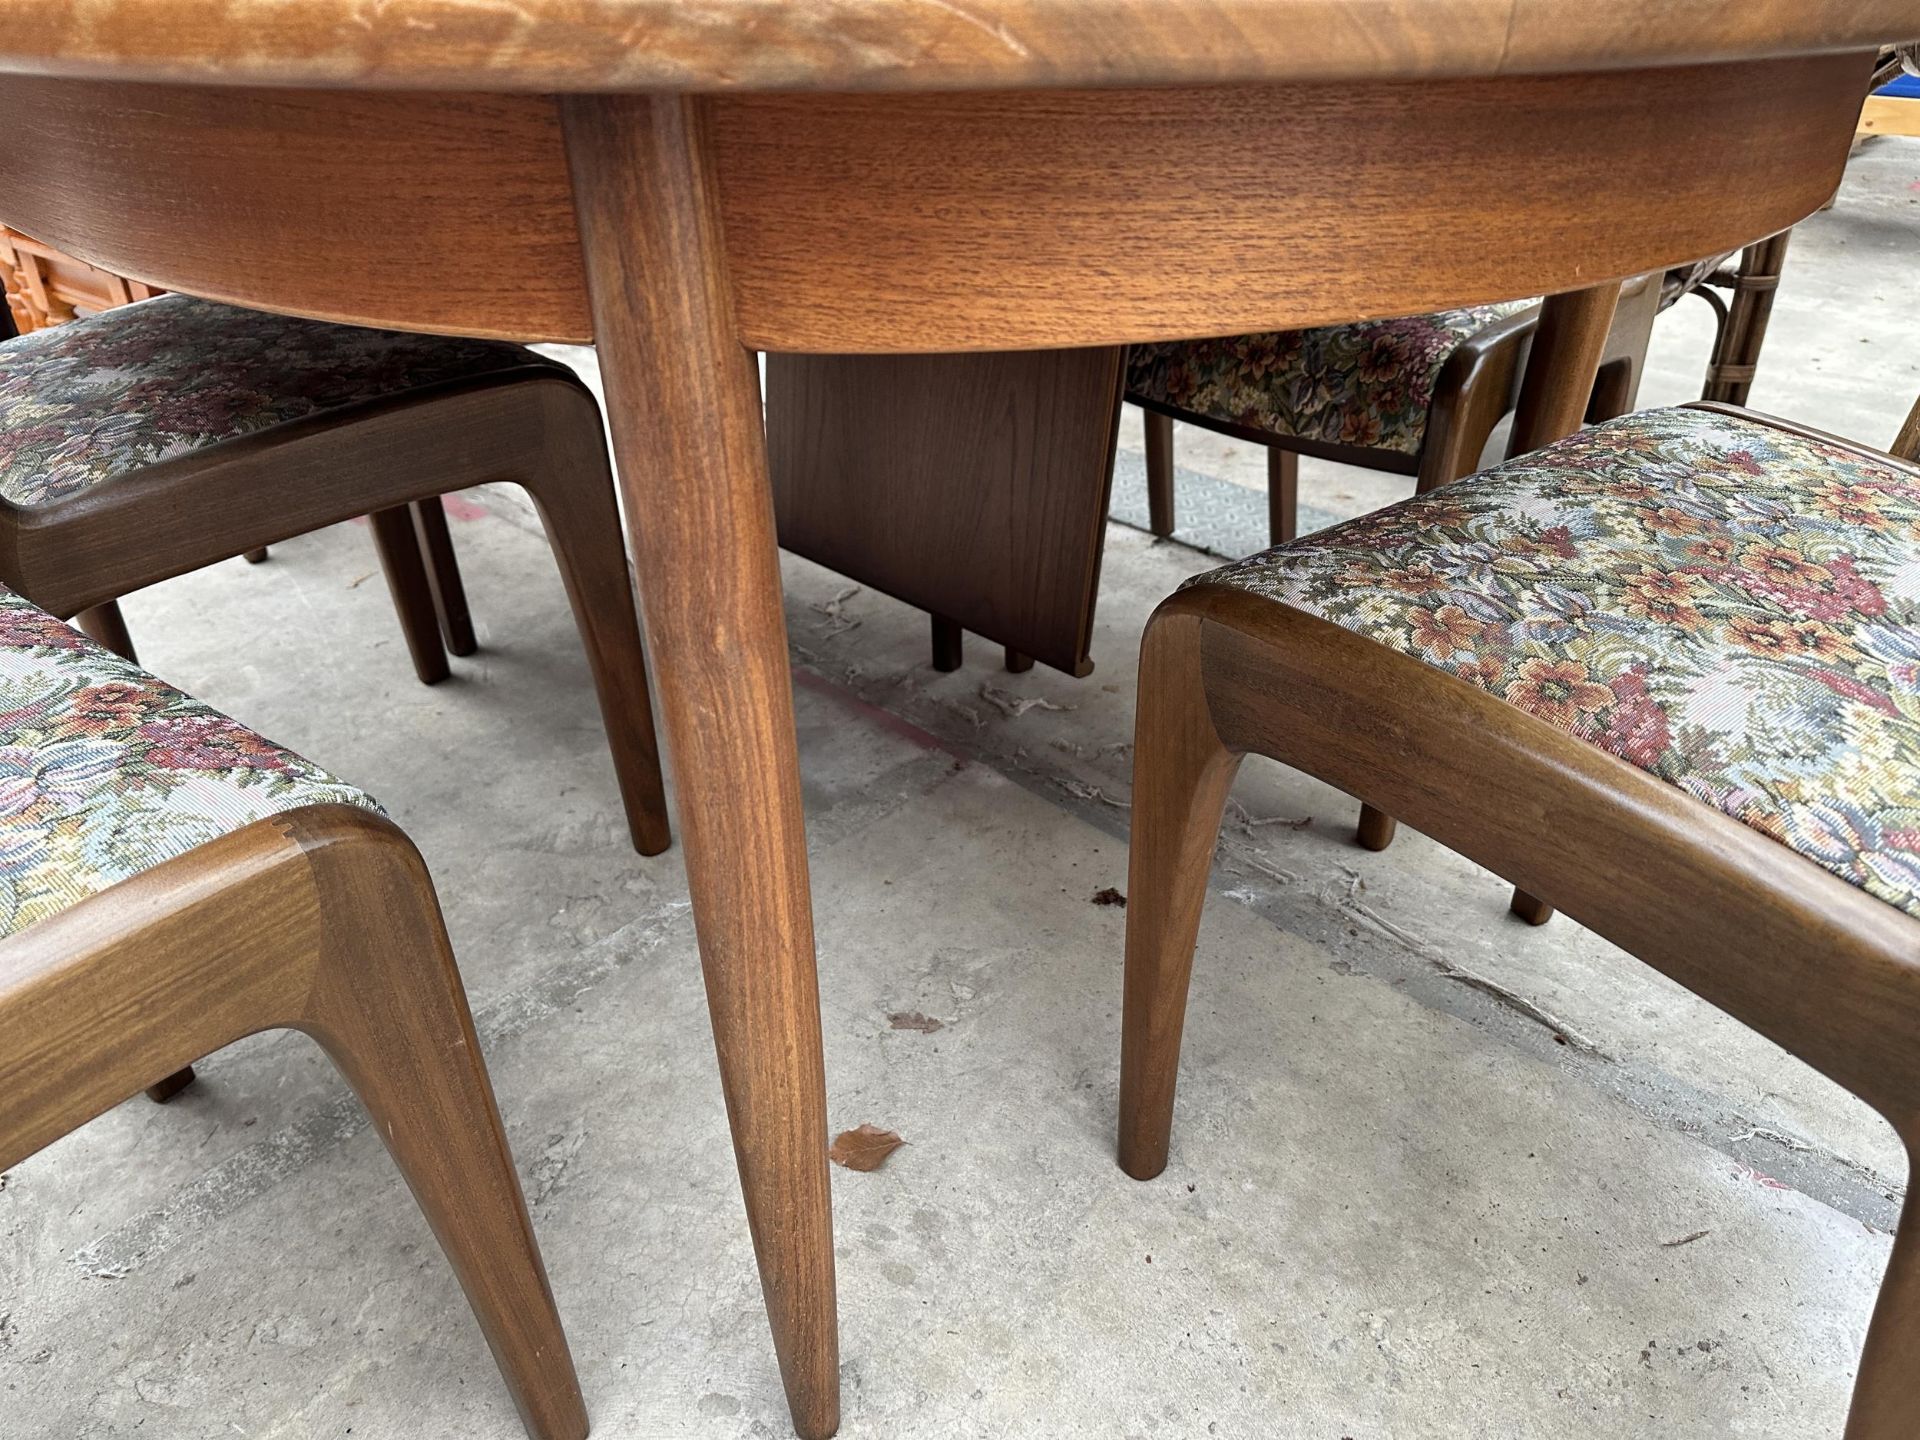 A G-PLAN RETRO TEAK EXTENDING DINING TABLE, 64 X 44" (LEAF 18") AND SIX LADDERBACK DINING CHAIRS - Image 3 of 10